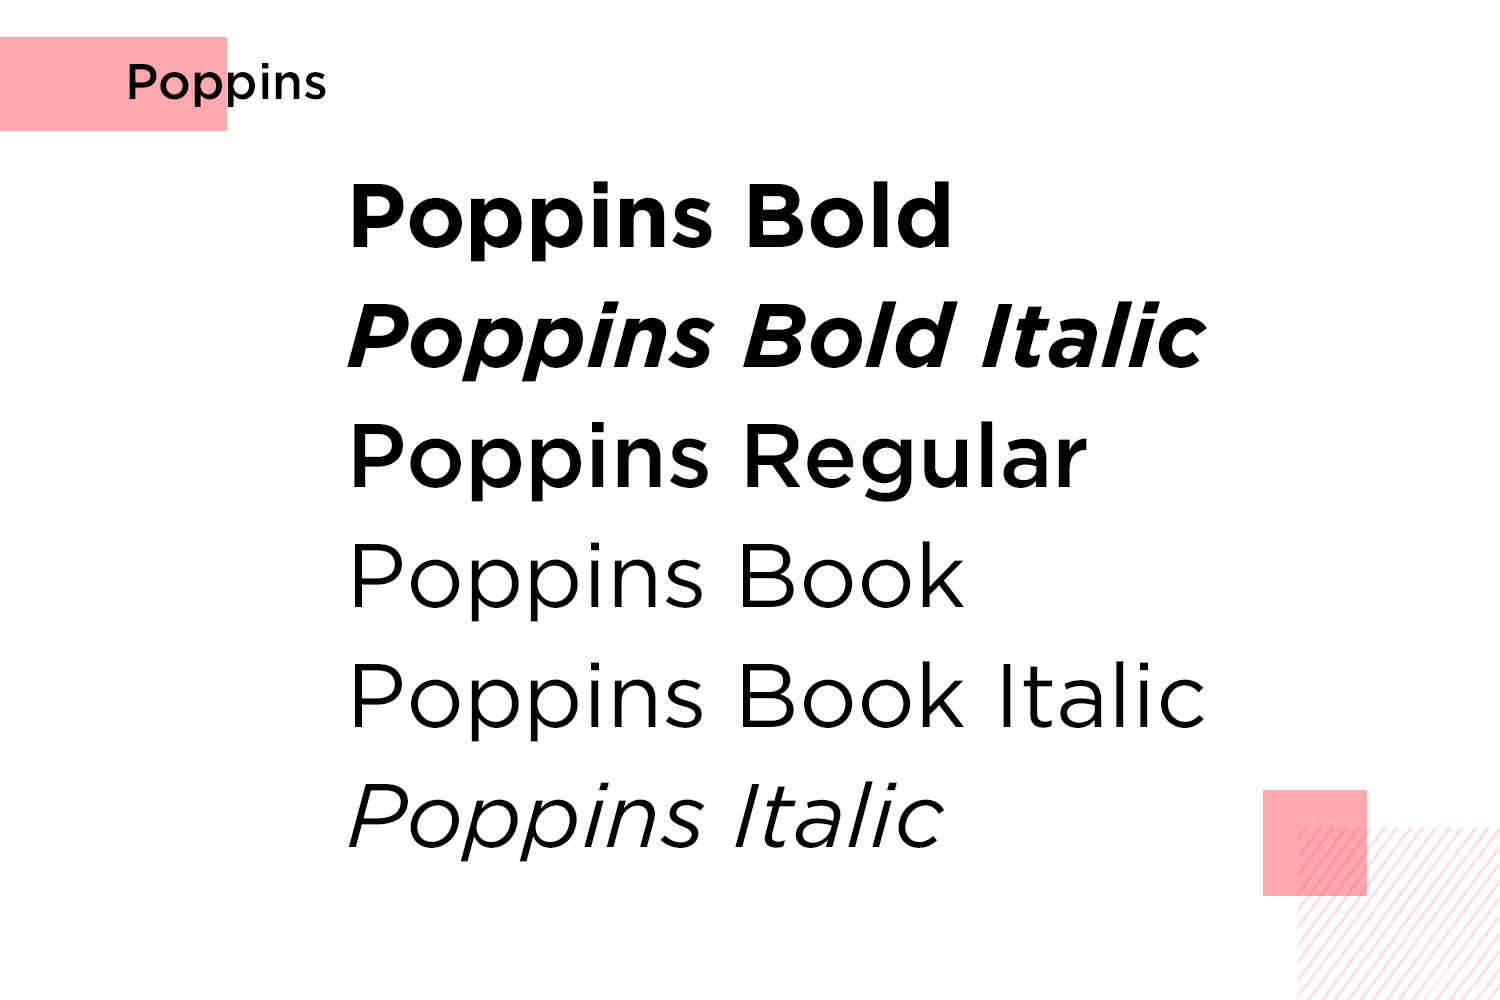 Poppins font variations in bold, italic, regular, and book styles